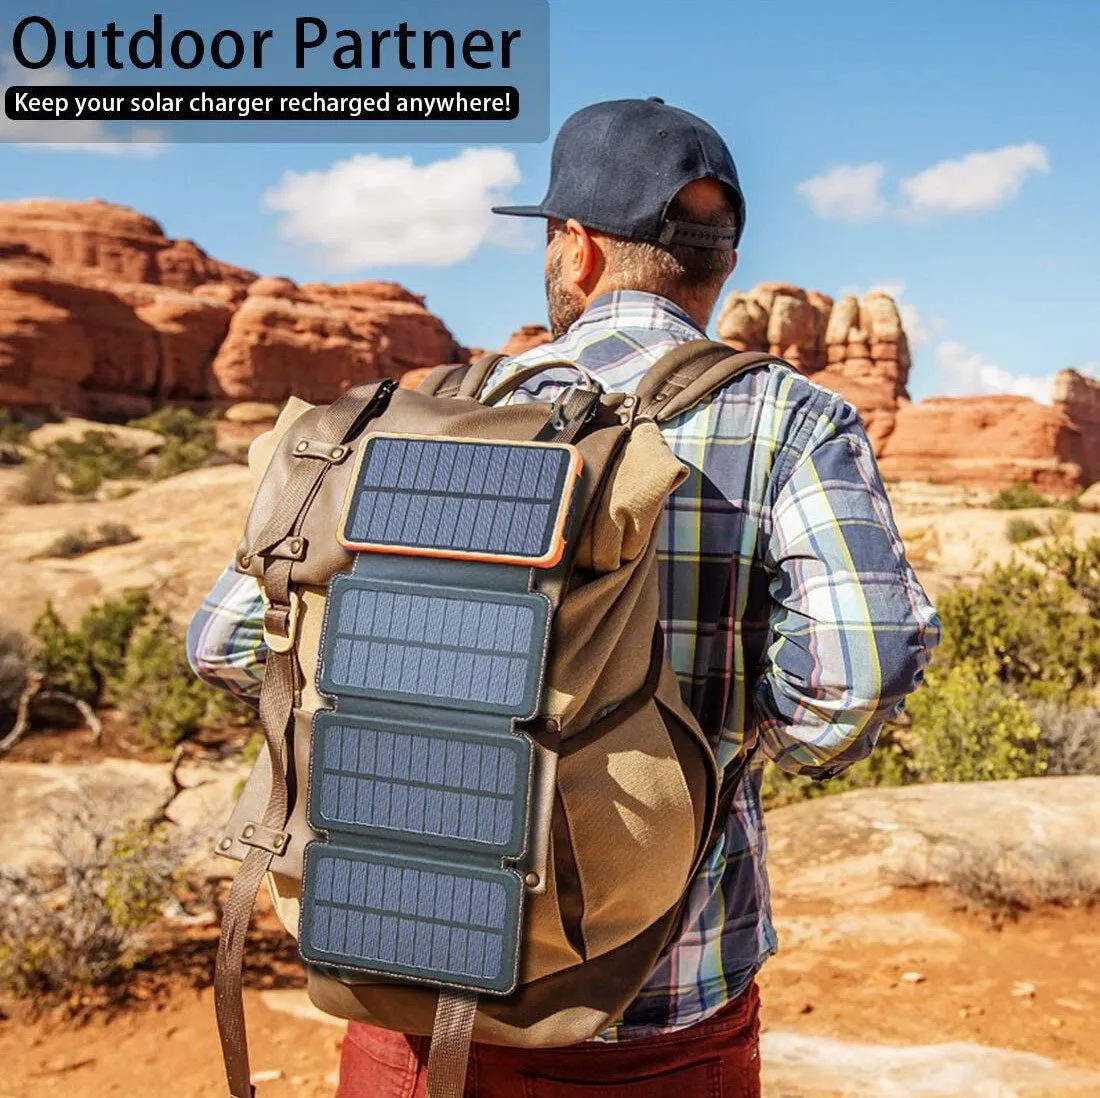 Rainproof Solar Cell Phone Charger